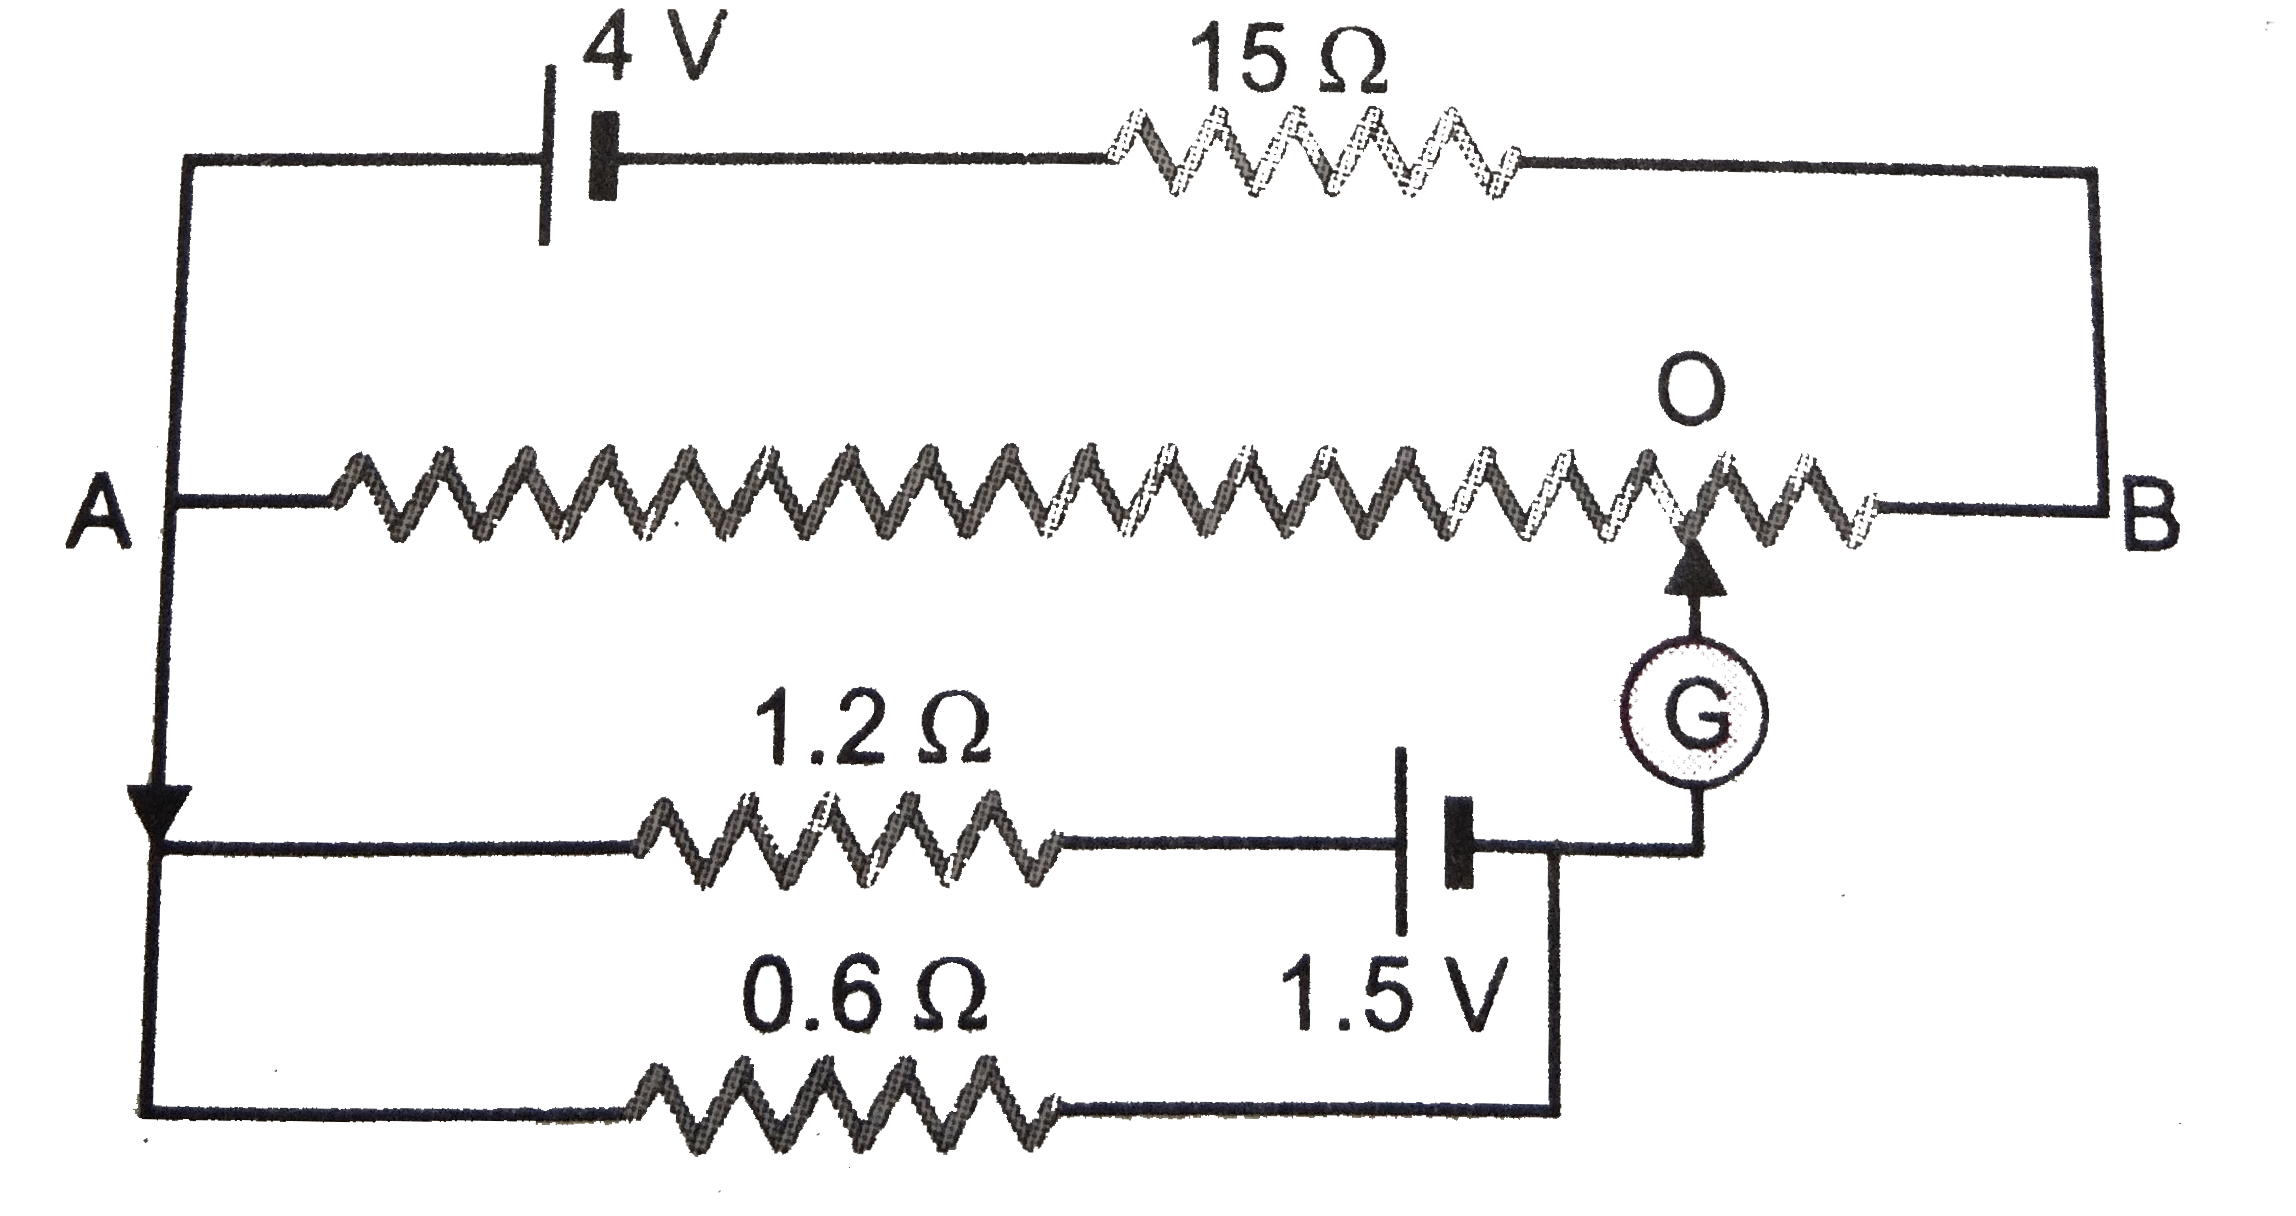 AB is 1 meter long uniform wire of 10 Omega resistance. Other data are shown in the diagram. Calculate (i) potential gradient along AB (ii) length AO when galvanometer shown deflection